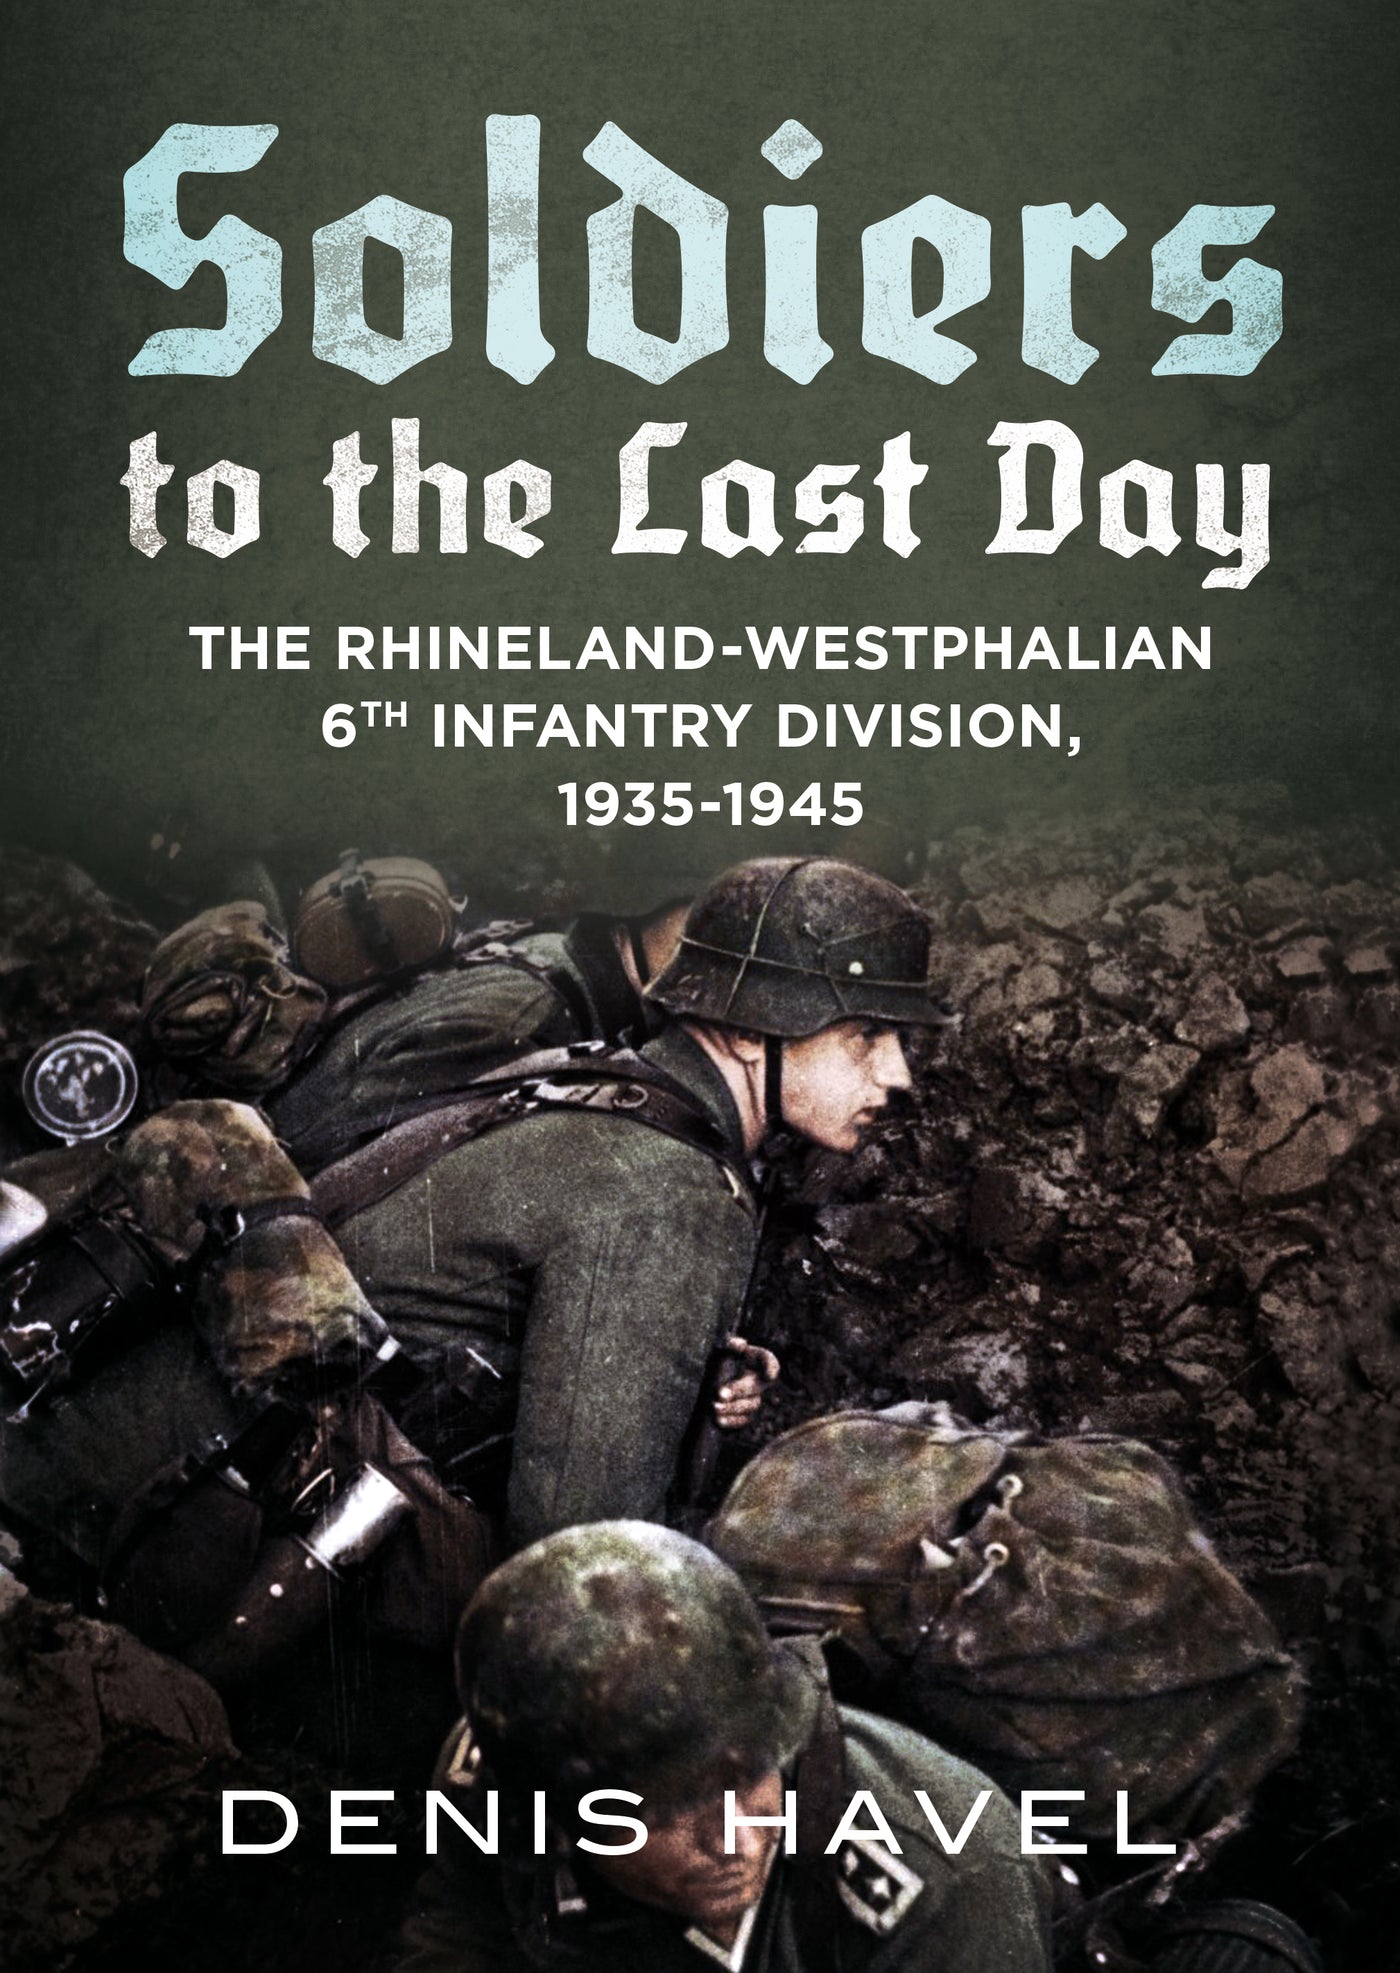 Soldiers to the Last Day